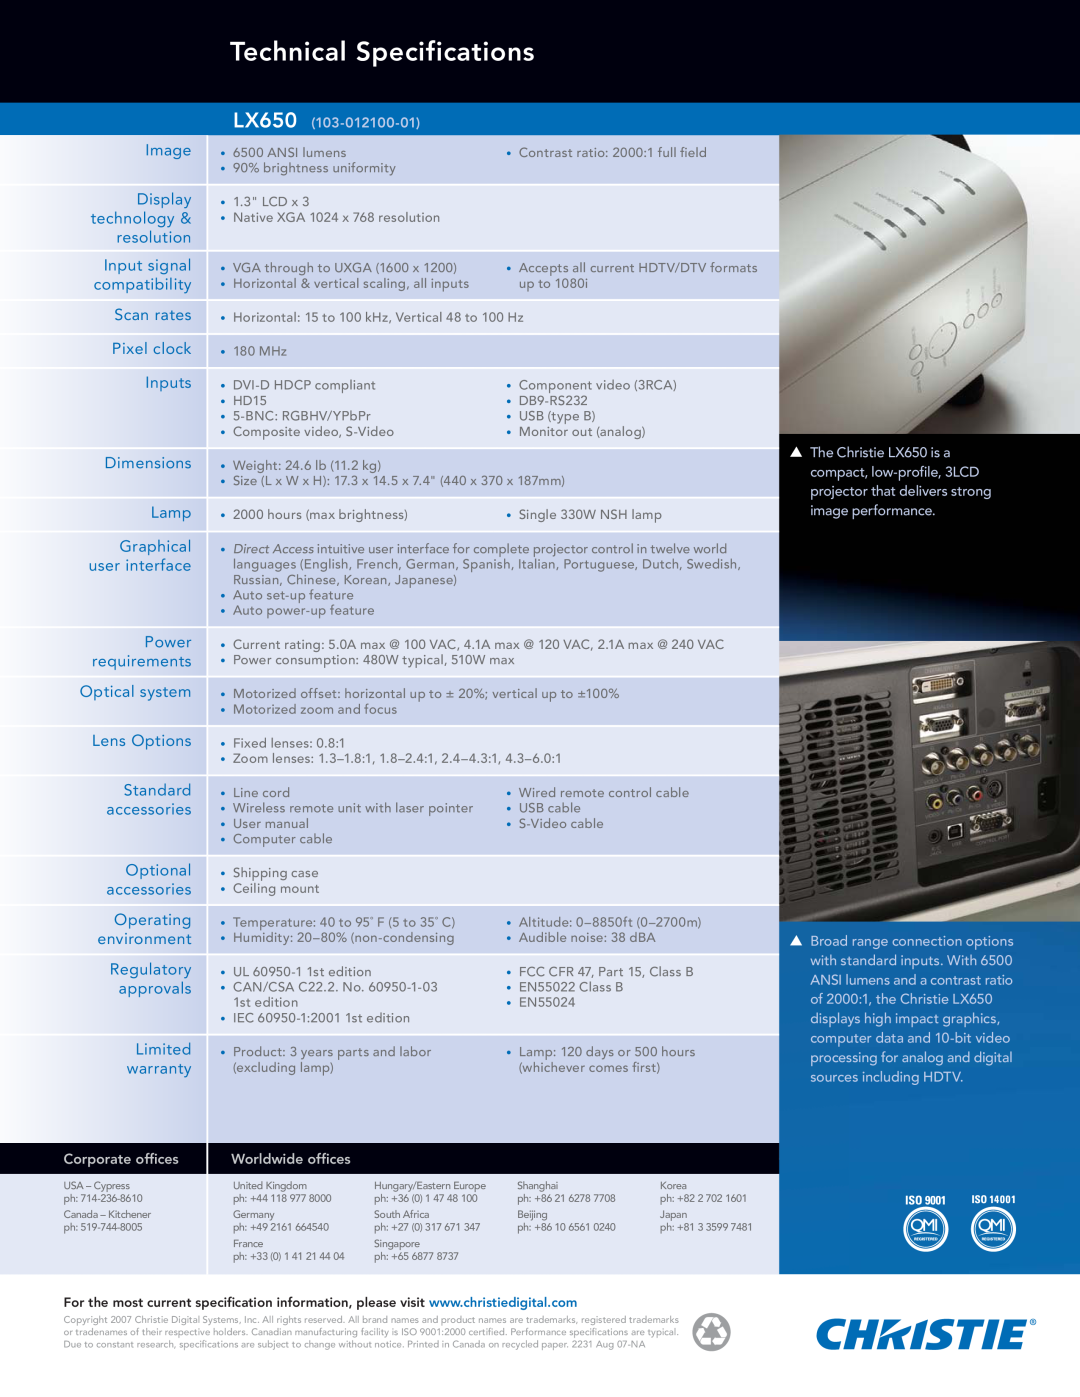 Christie Digital Systems LX650 manual Technical Specifications 